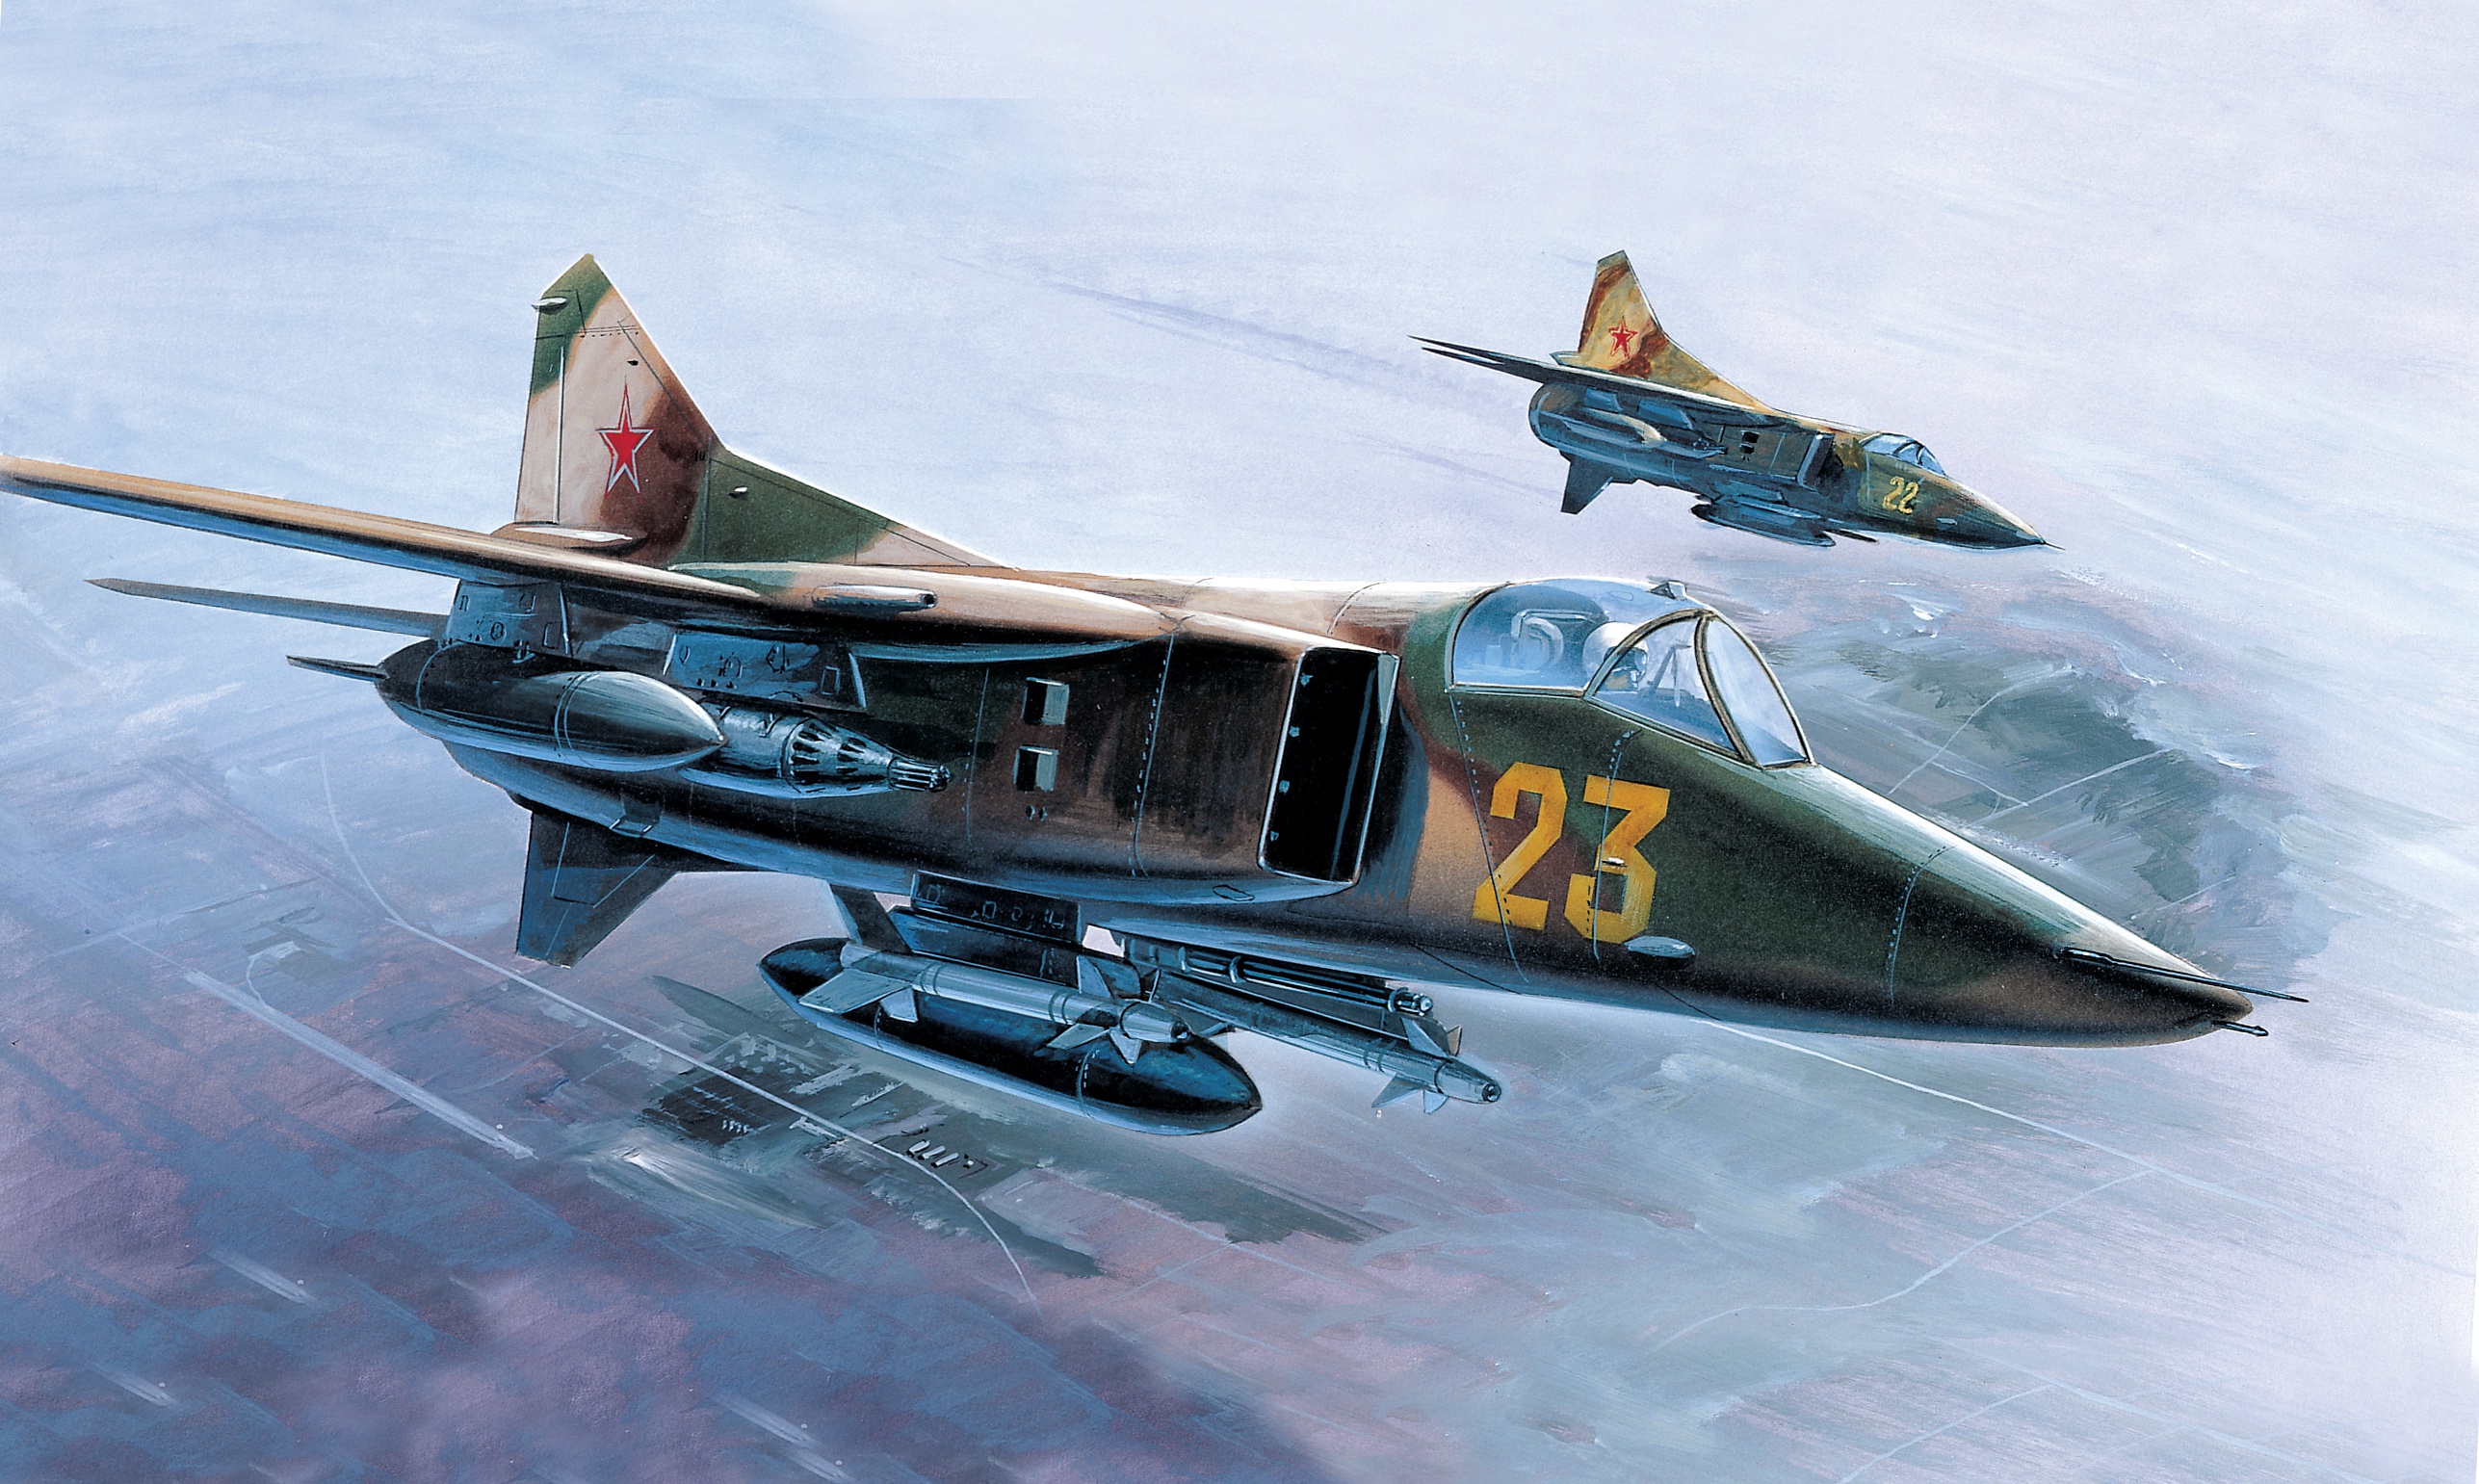 General 2574x1541 aircraft military military aircraft vehicle artwork MiG-23 military vehicle numbers Mikoyan MiG-27